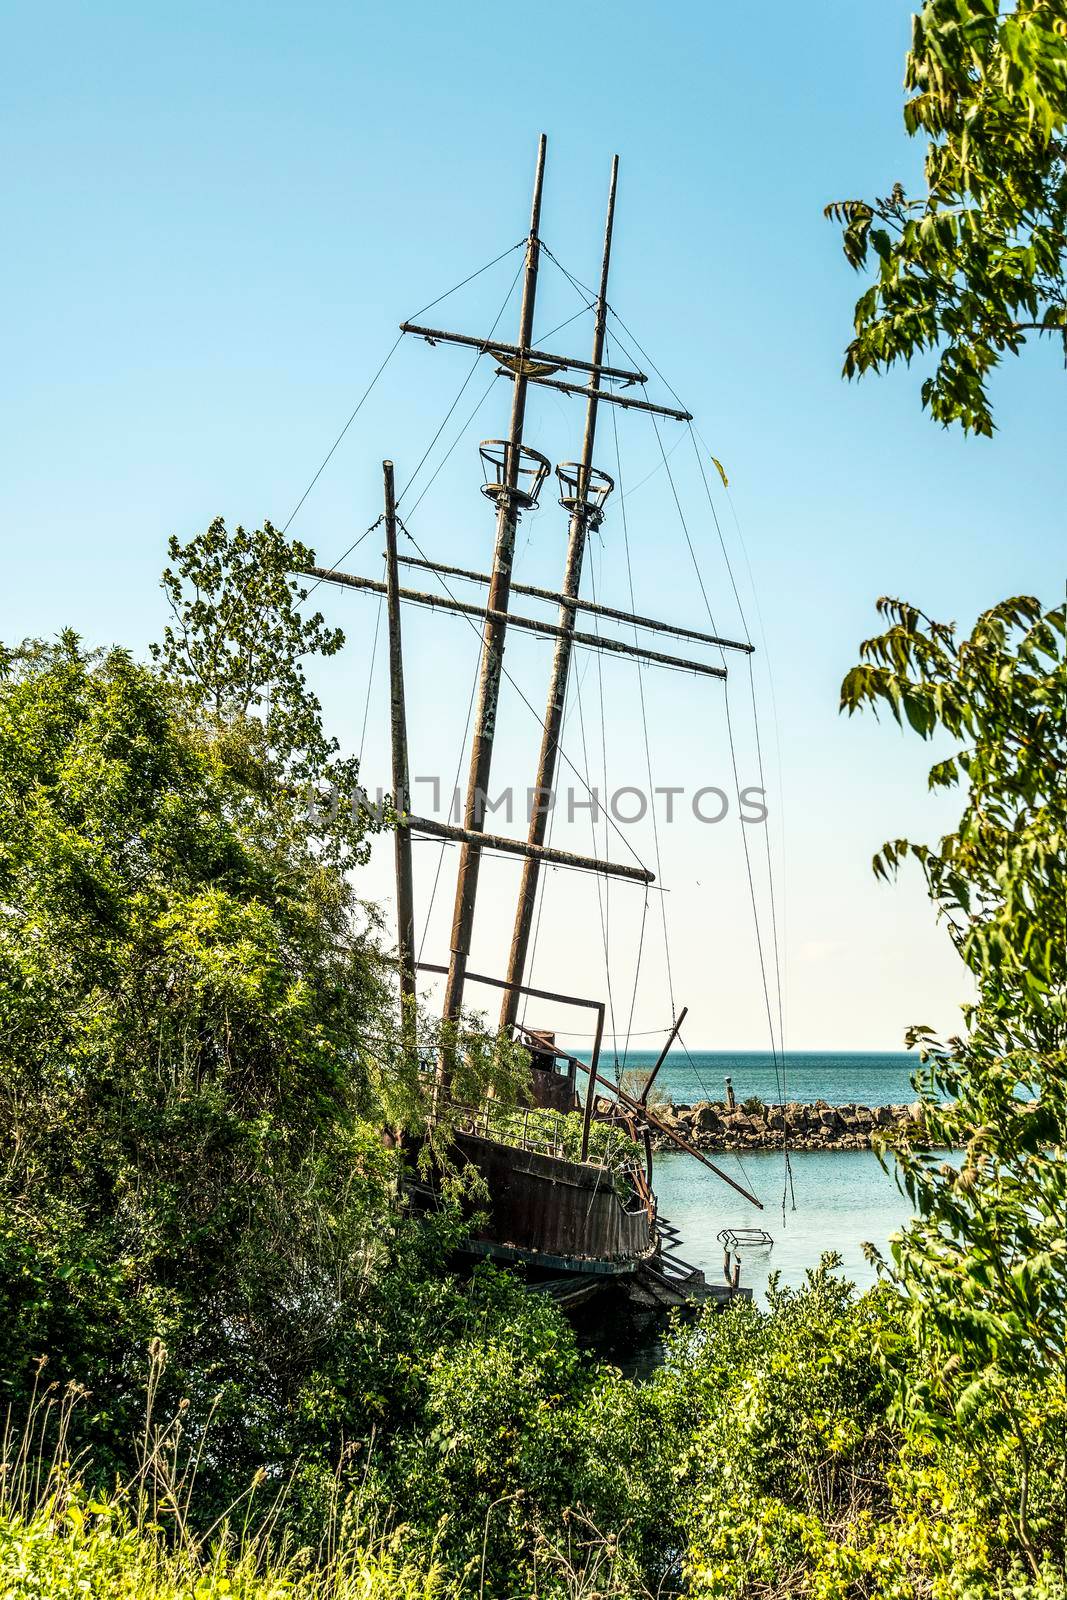 On one of the lakes in Ontario, on the dock, a rusting three-masted ship is living out its last days.